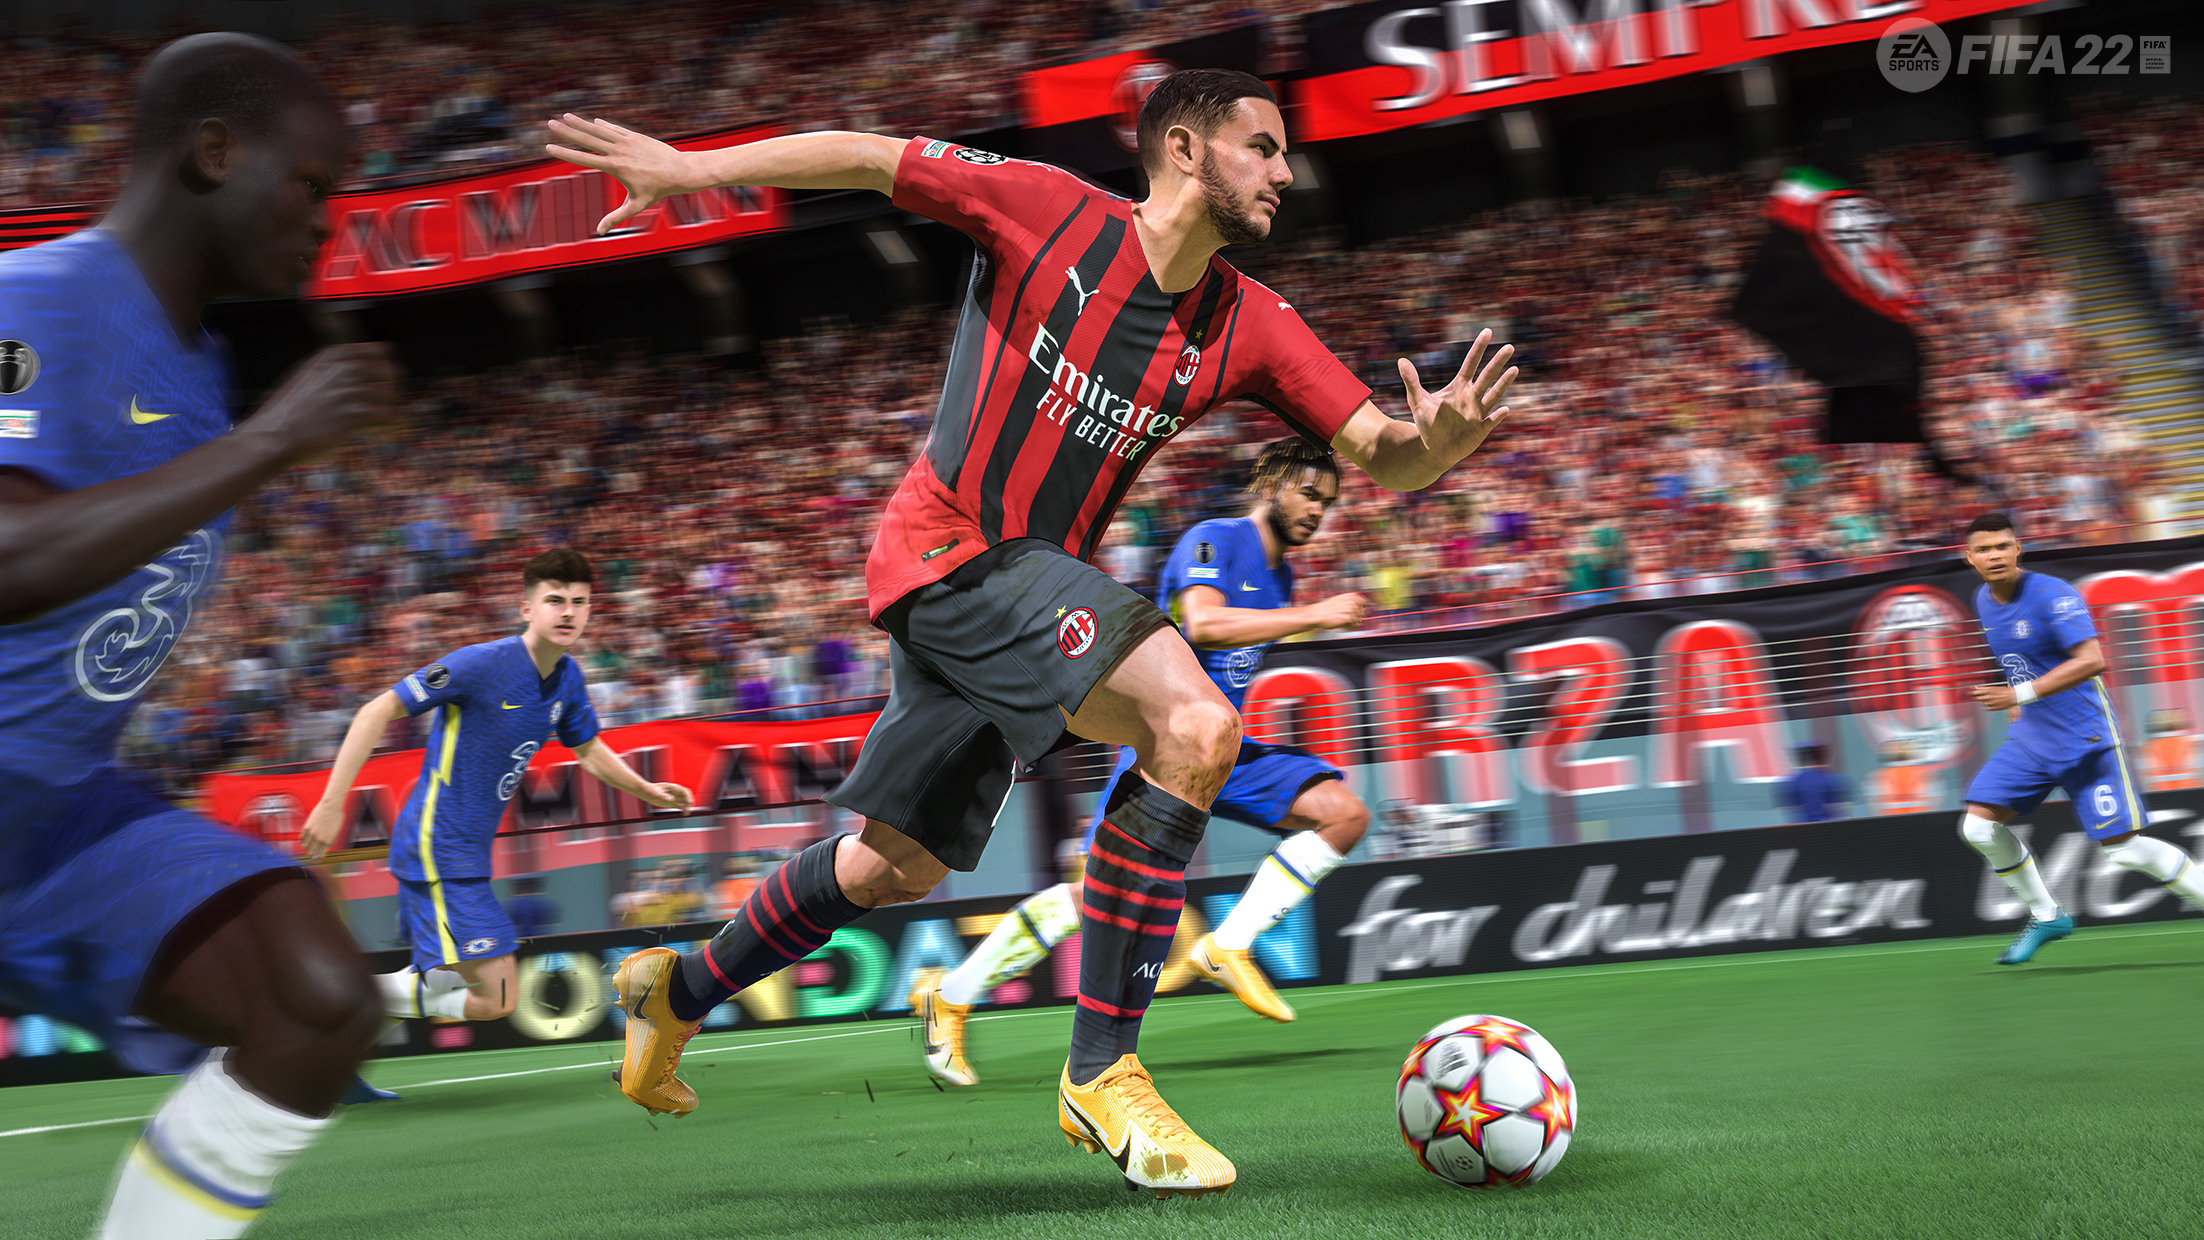 Video Game FiFA 22 2204x1240